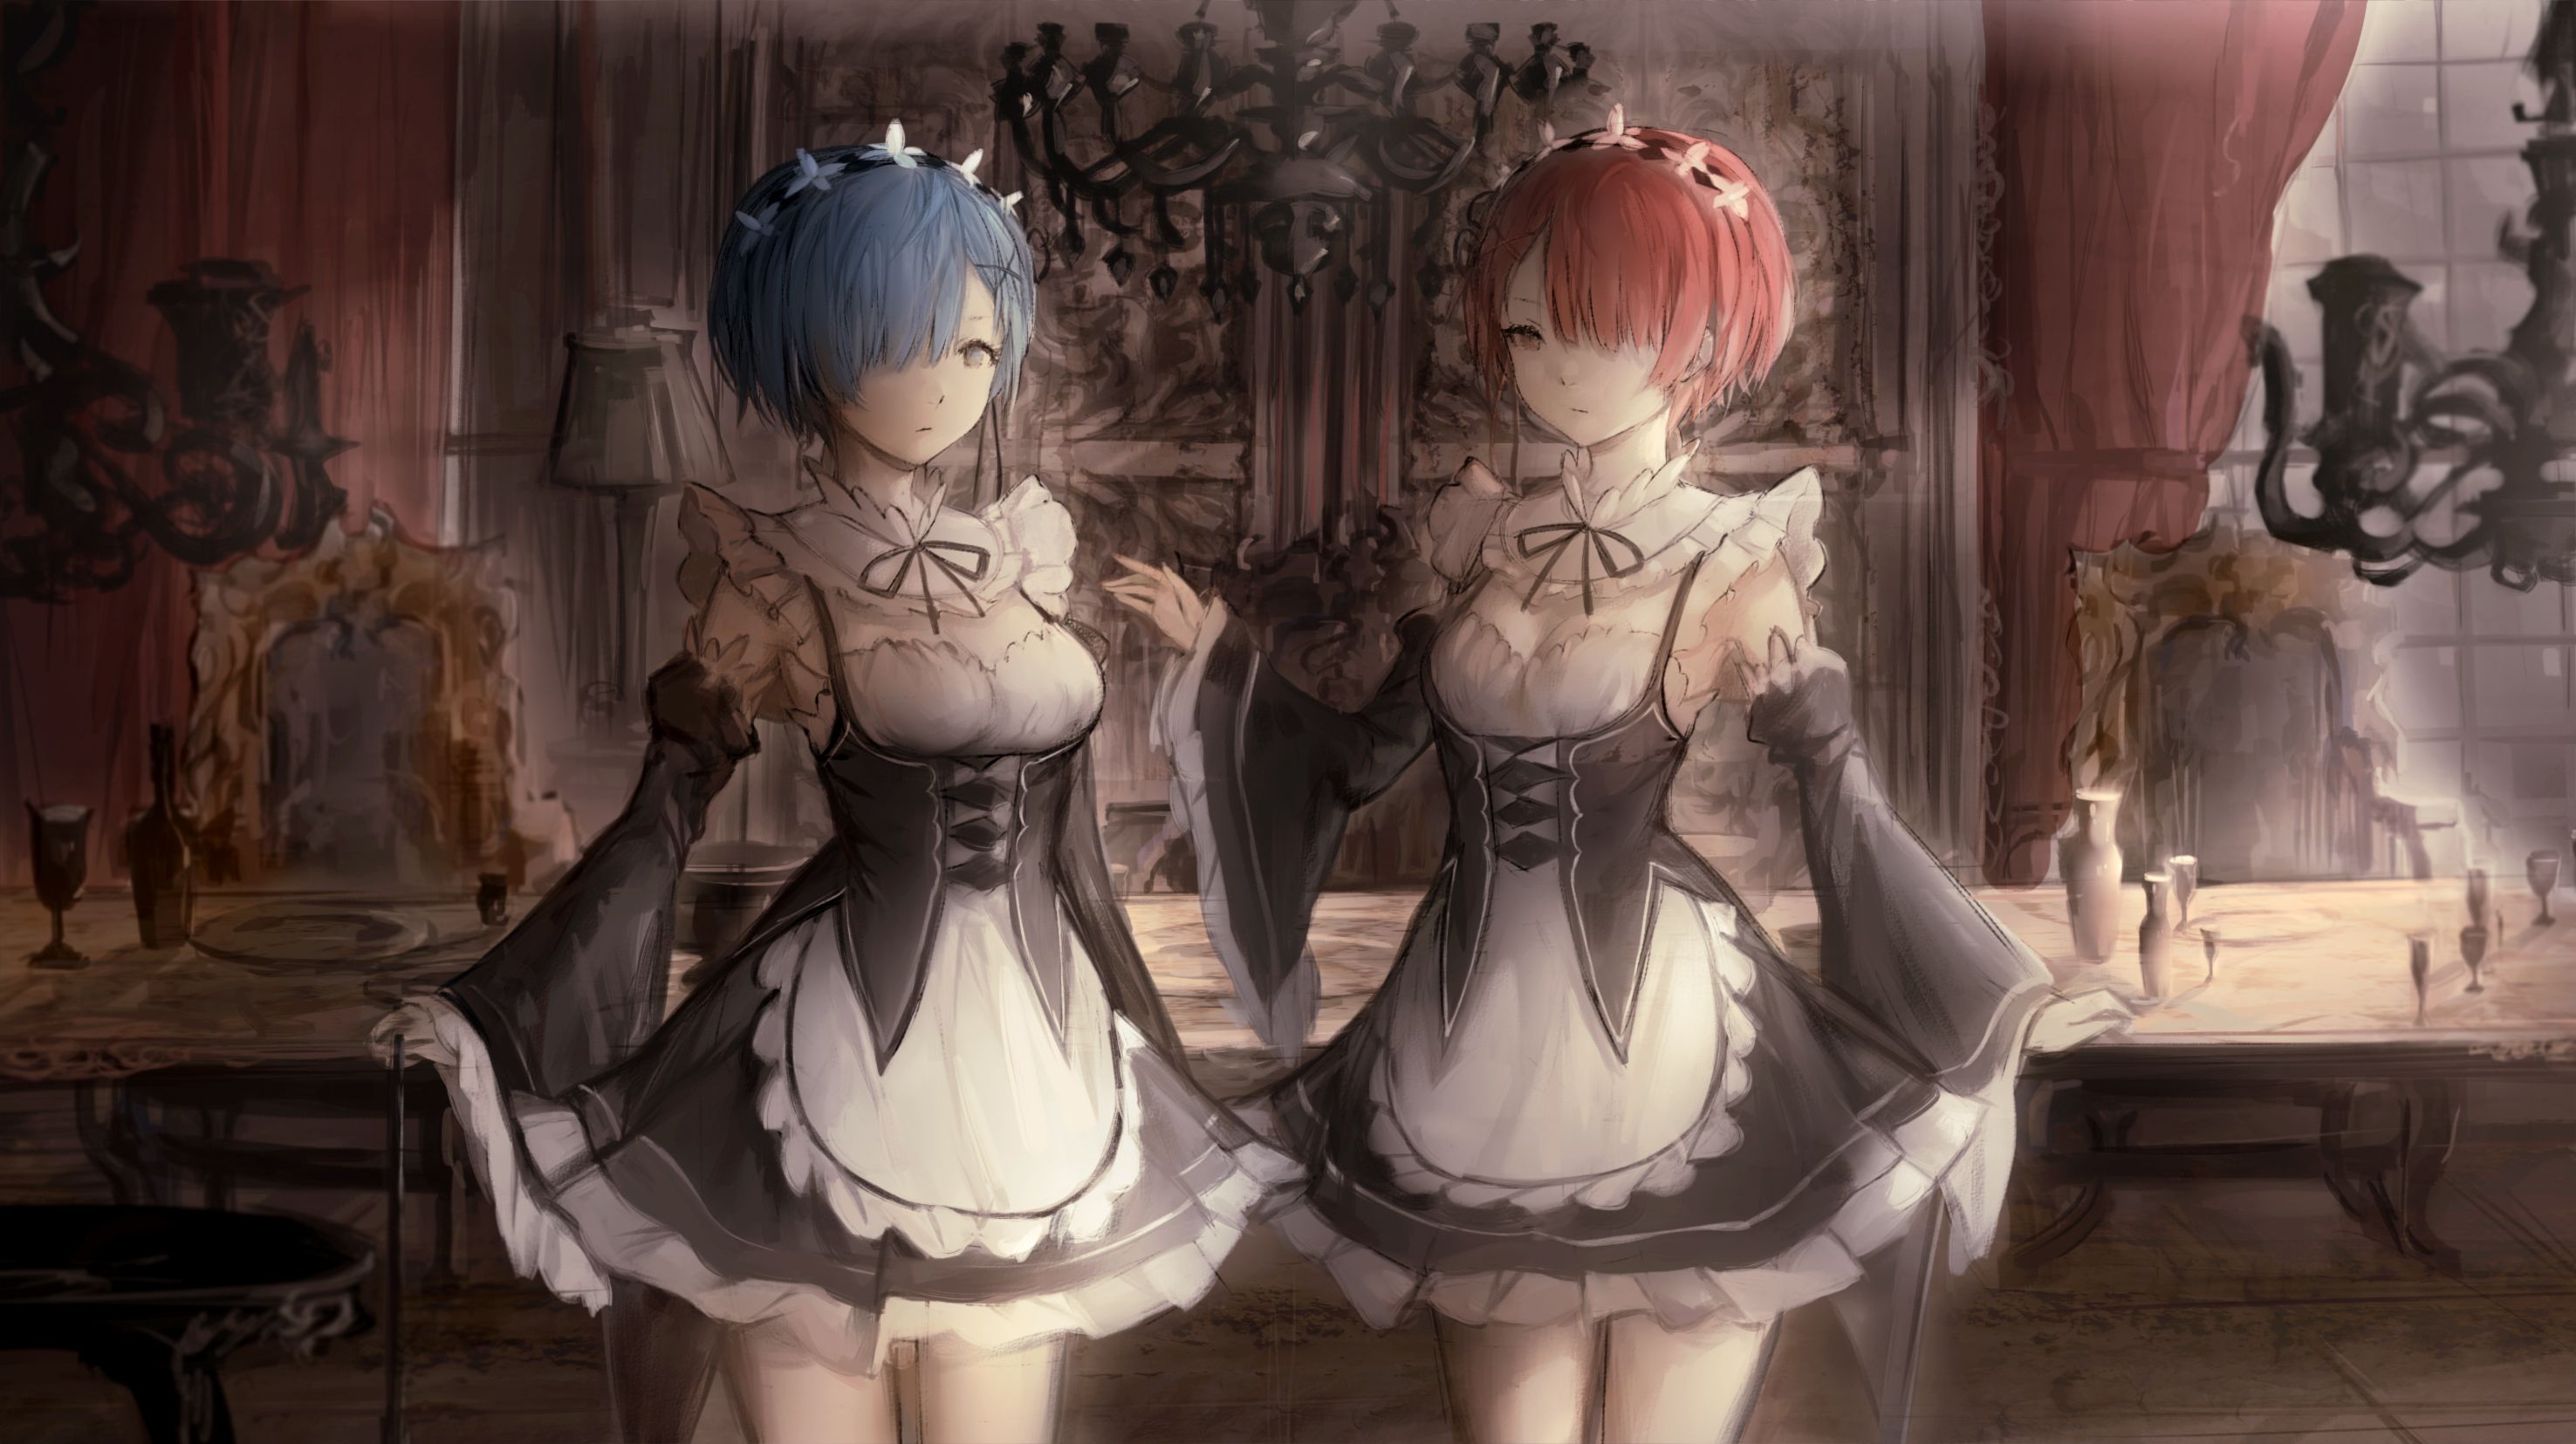 Hd Wallpaper Twin Sisters With Blue And Pink Hair